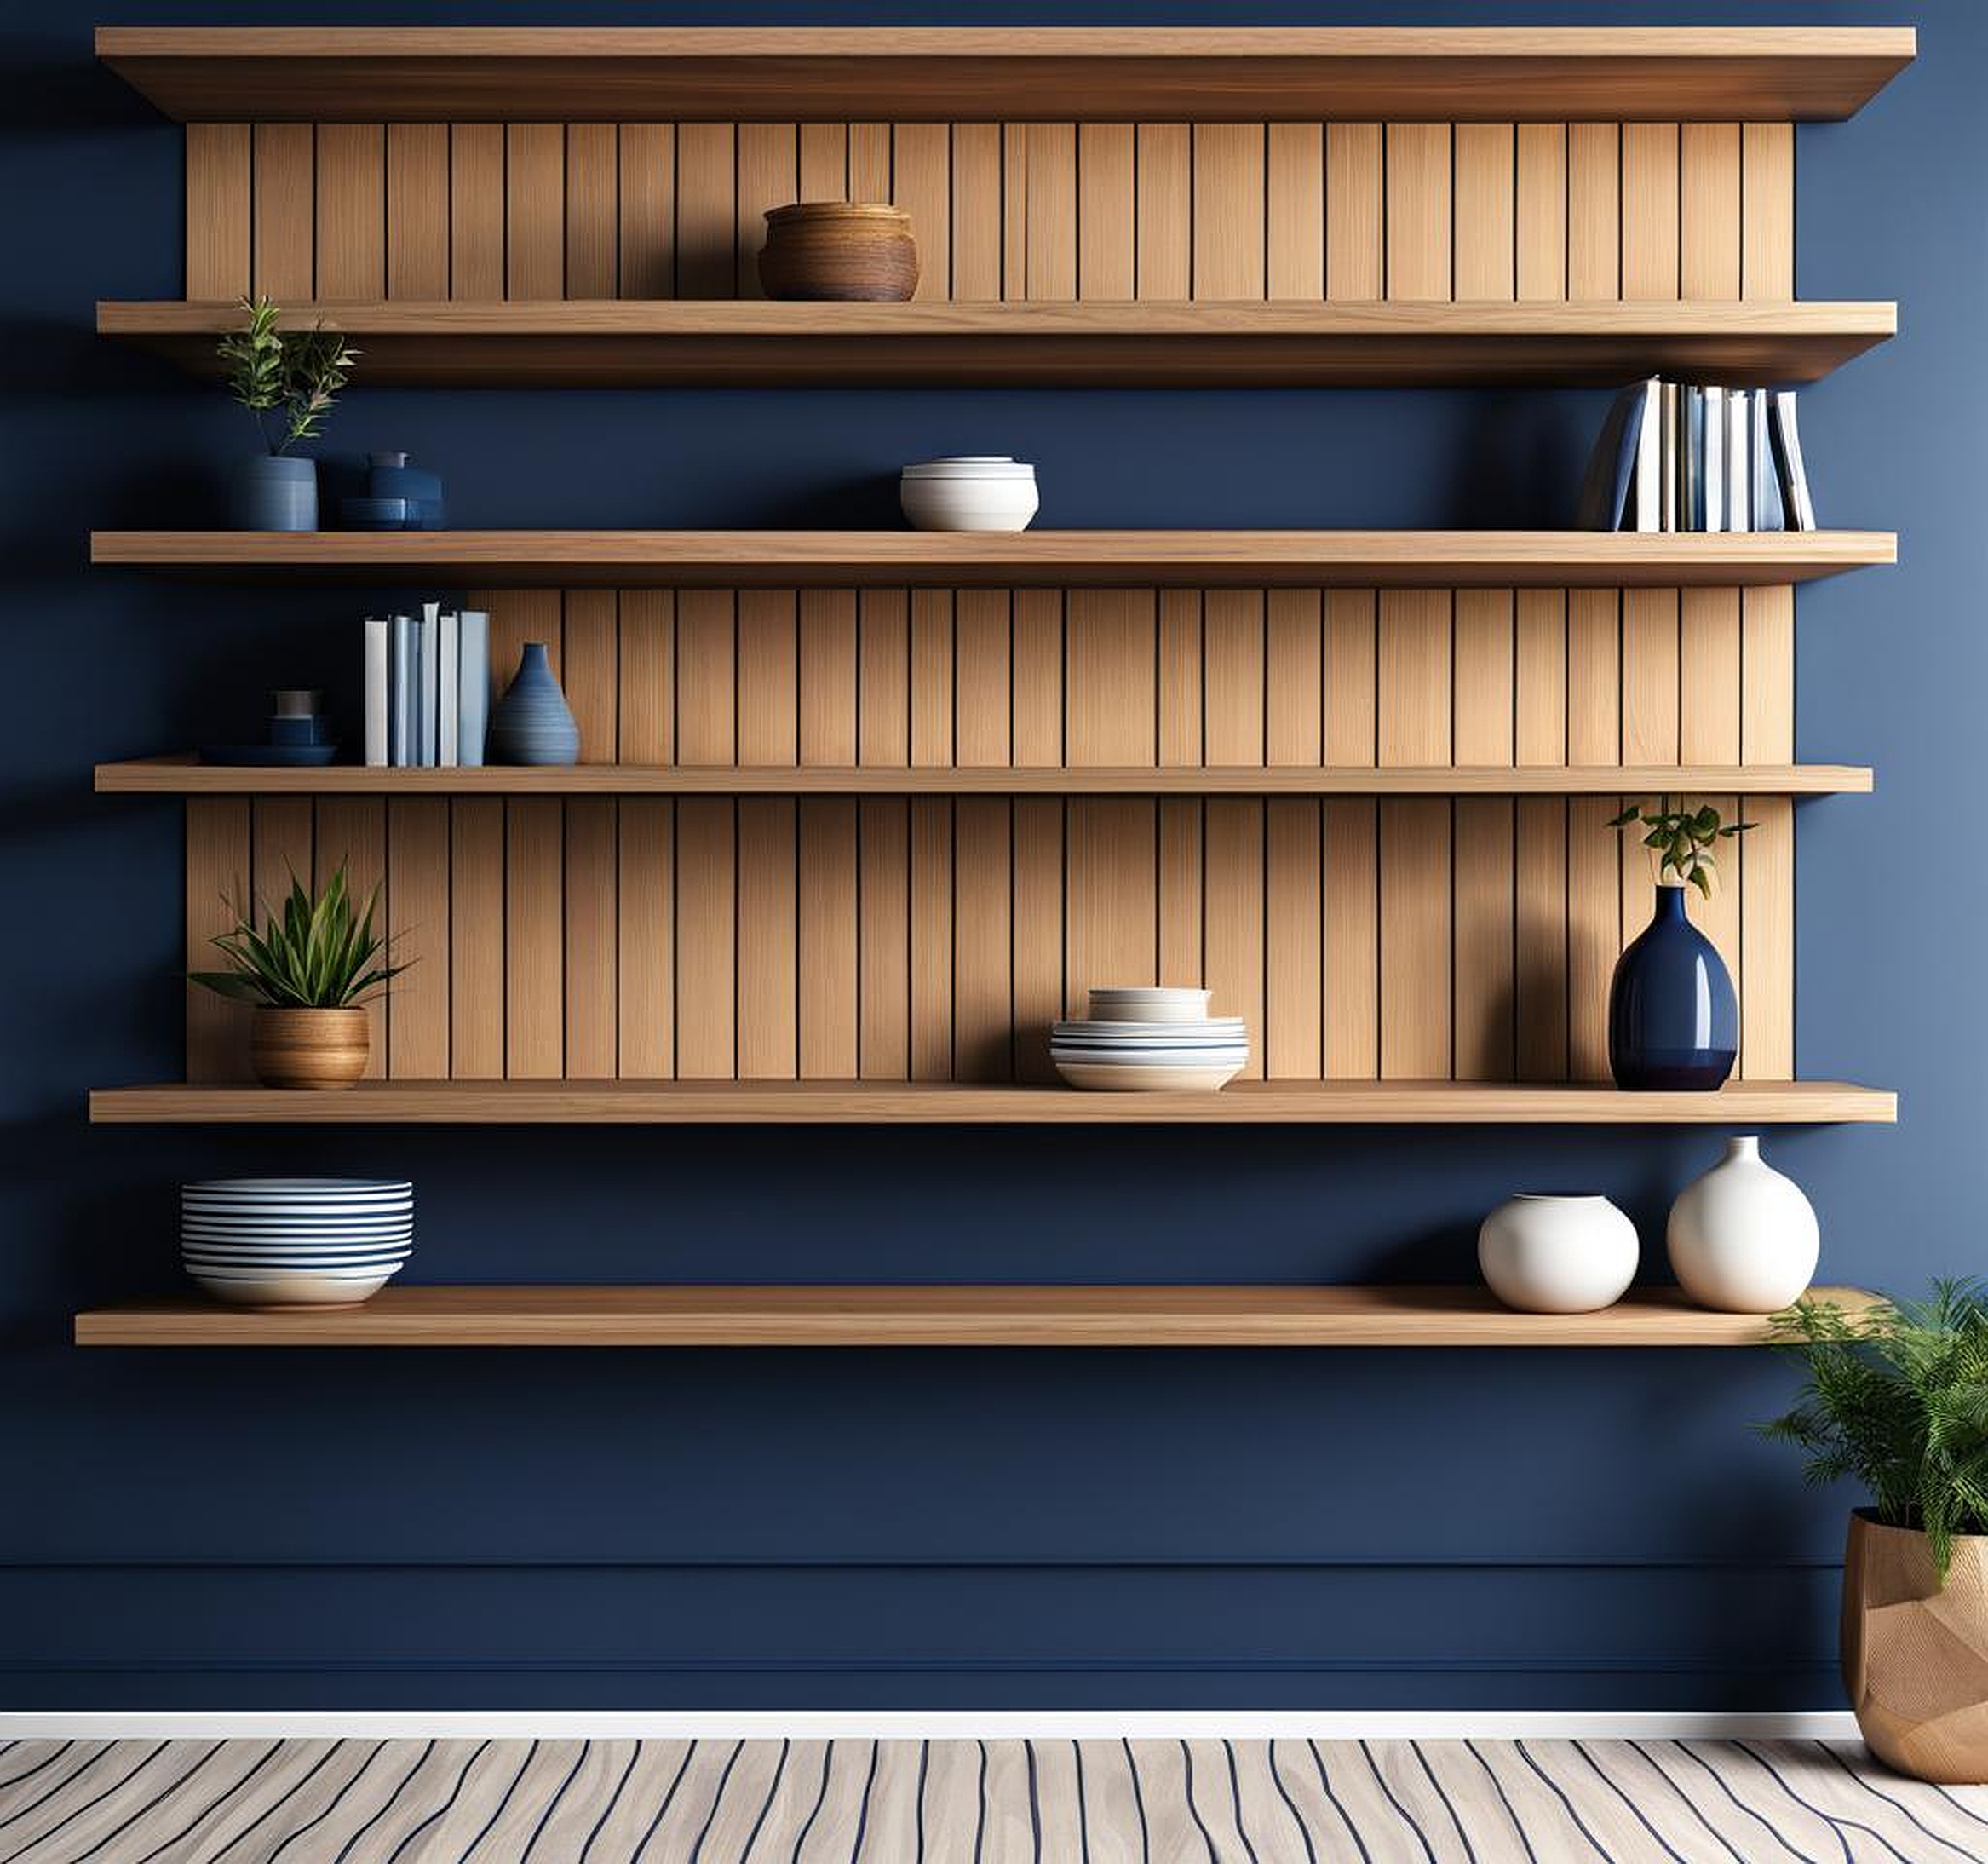 Using Navy Blue Floating Shelves to Add Depth and Texture to Walls